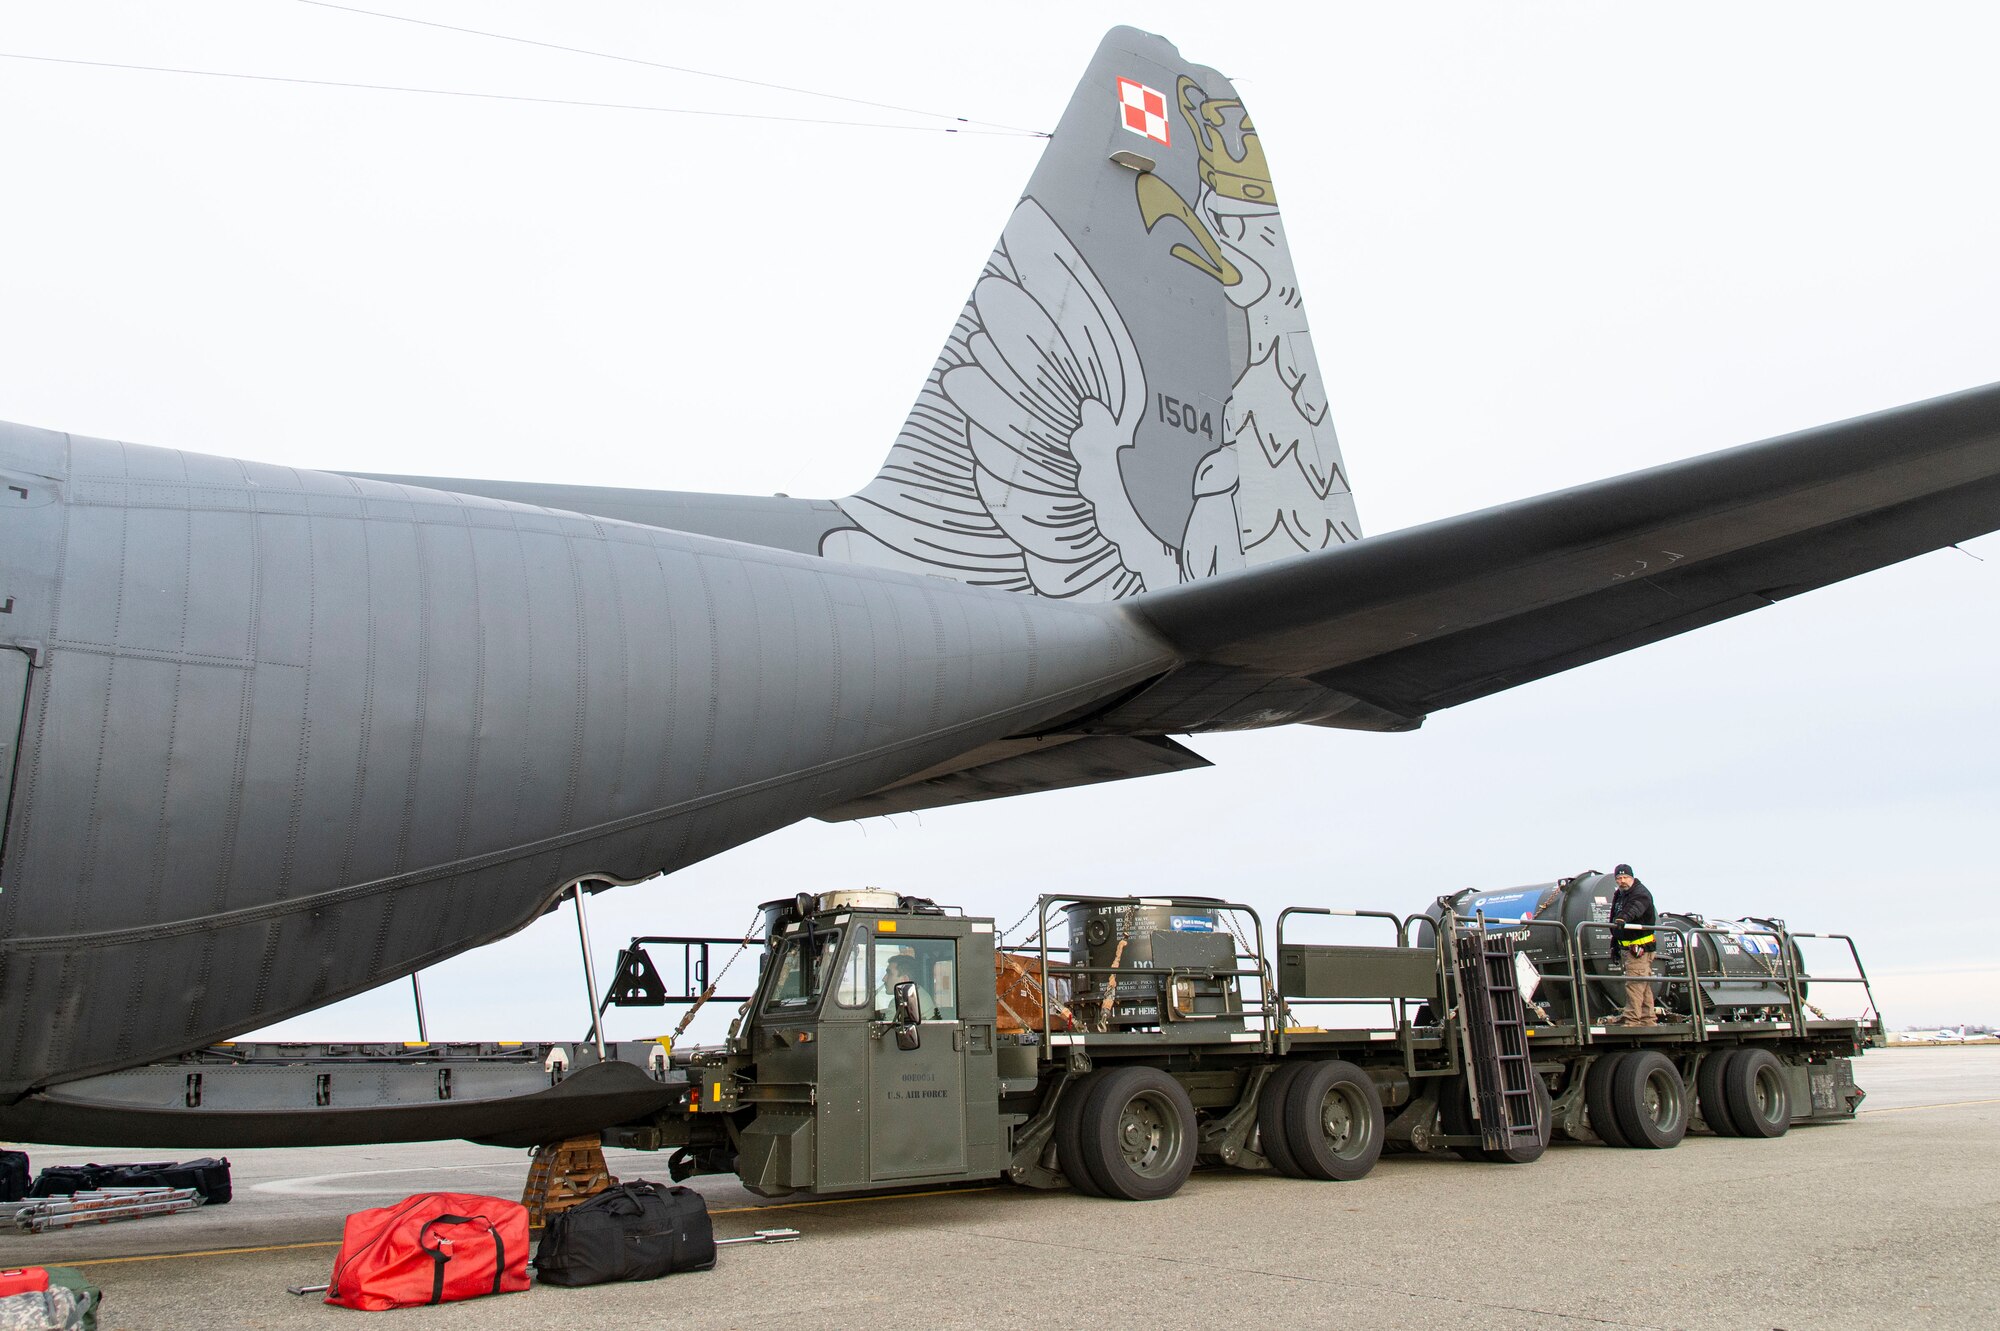 Ramp services personnel from the 436th Aerial Port Squadron secure pallets on a cargo loader after unloading a Polish air force C-130E Hercules Dec. 7, 2021, at Dover Air Force Base, Delaware, as part of a foreign military sales mission. The United States and Poland have enjoyed decades-long warm bilateral relations. Poland is a stalwart NATO ally, and both the U.S. and Poland remain committed to the regional security and prosperity of Europe. Due to its strategic location, Dover AFB supports approximately $3.5 billion worth of foreign military sales annually. (U.S. Air Force photo by Roland Balik)